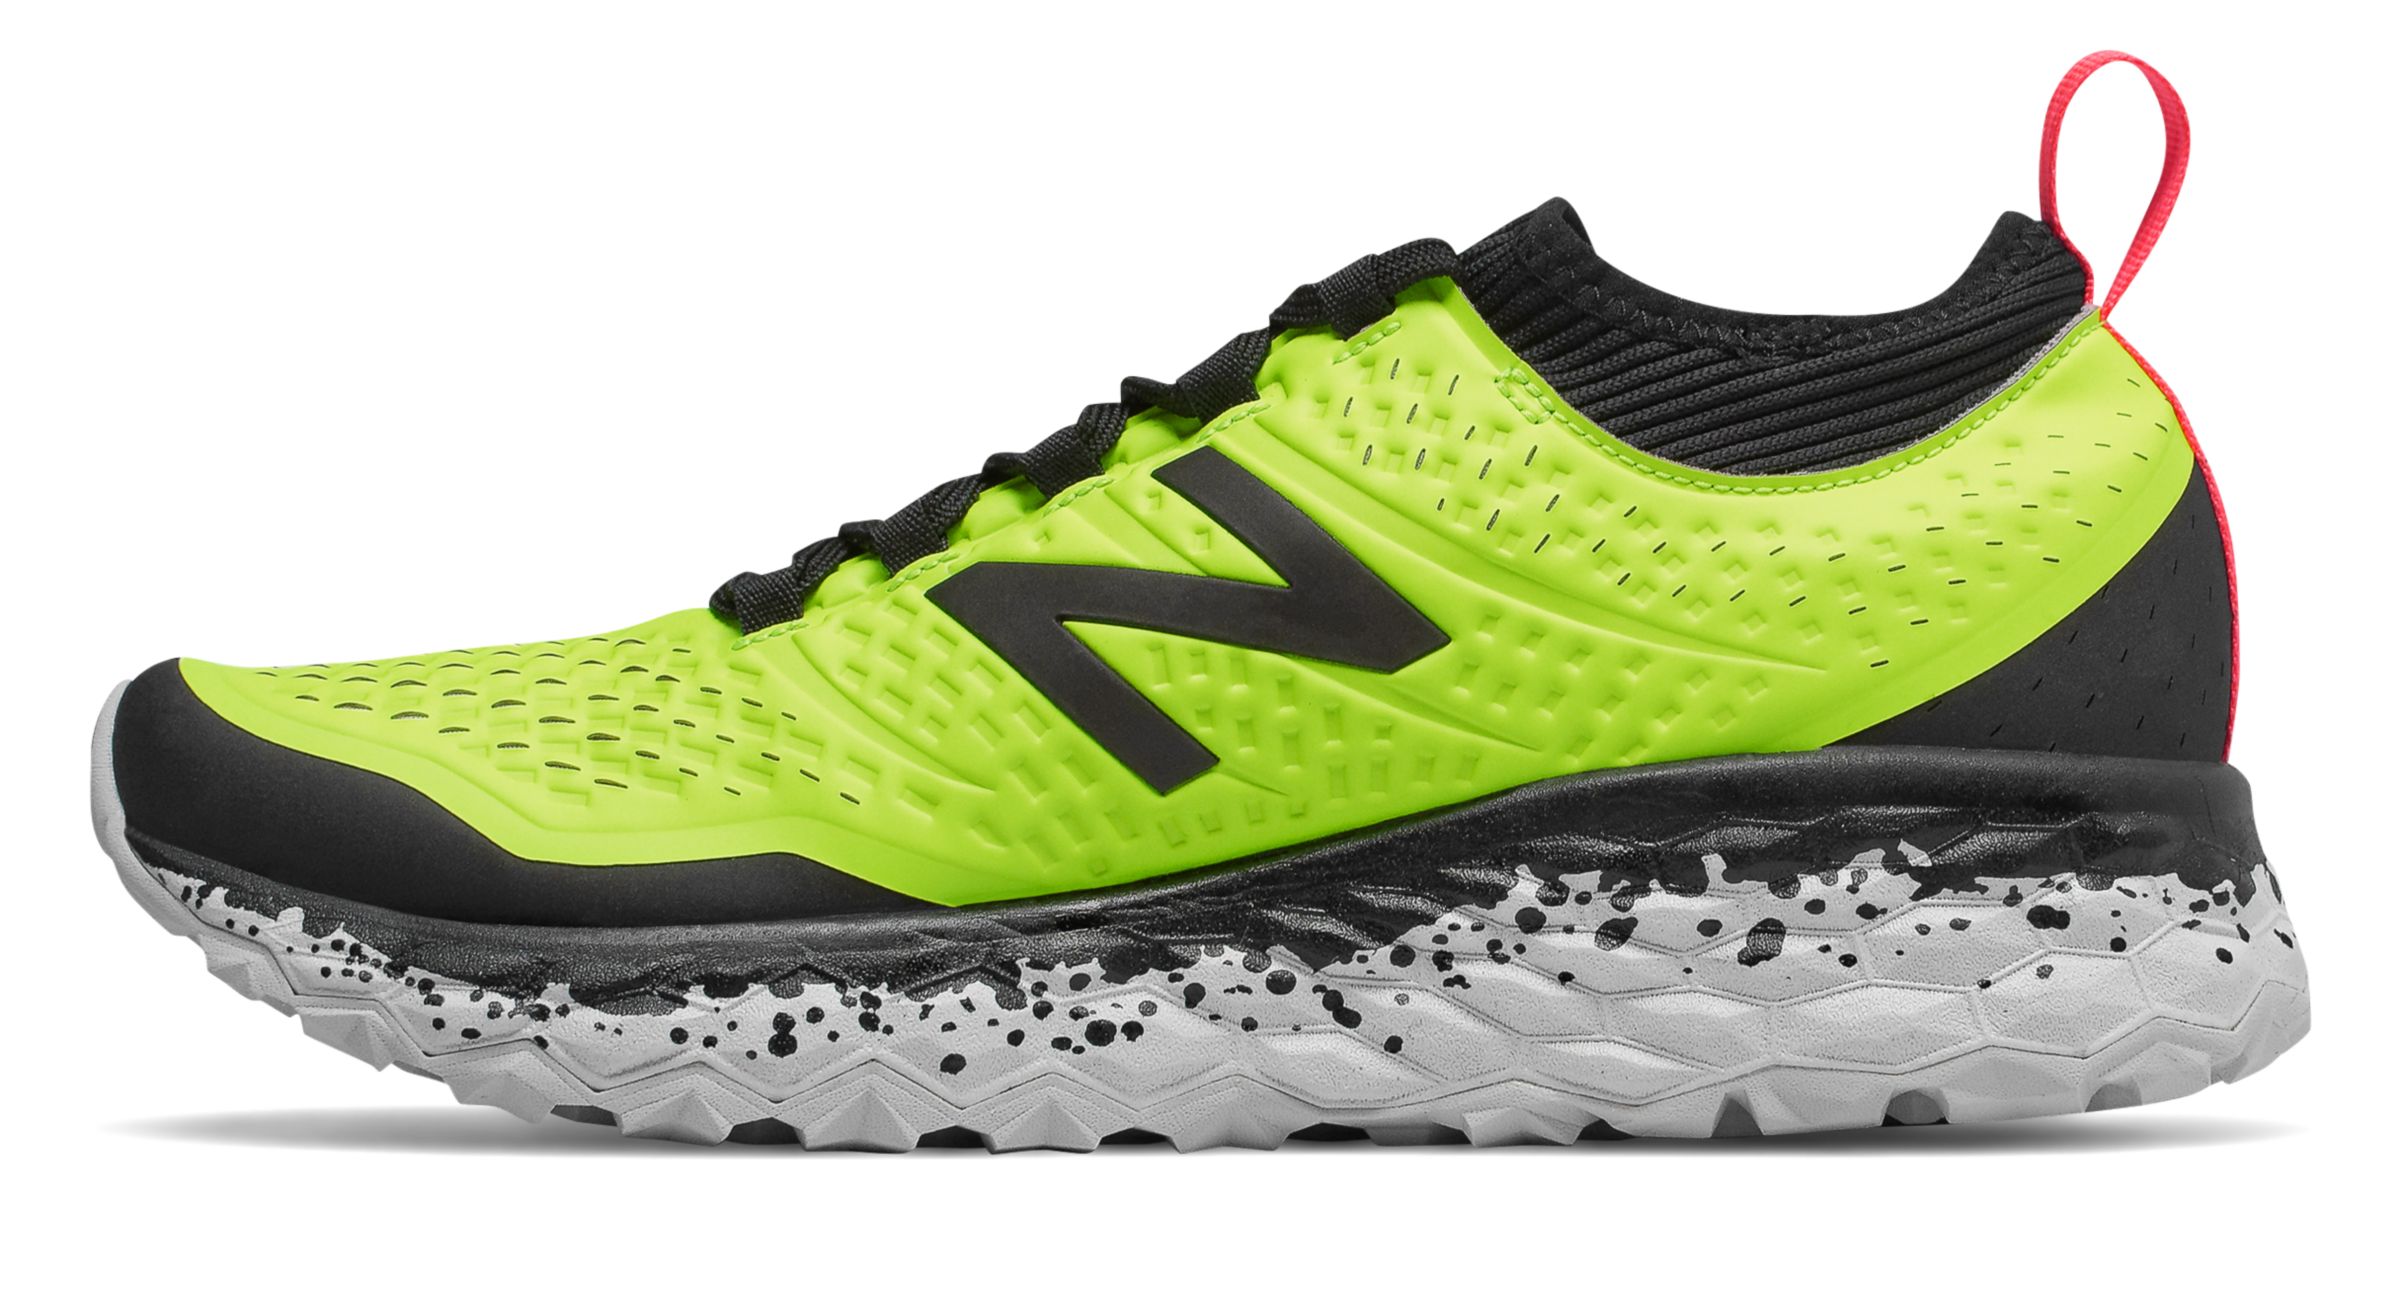 New Balance MTHIER-V3 on Sale - Discounts Up to 49% Off on MTHIERY3 at  Joe's New Balance Outlet